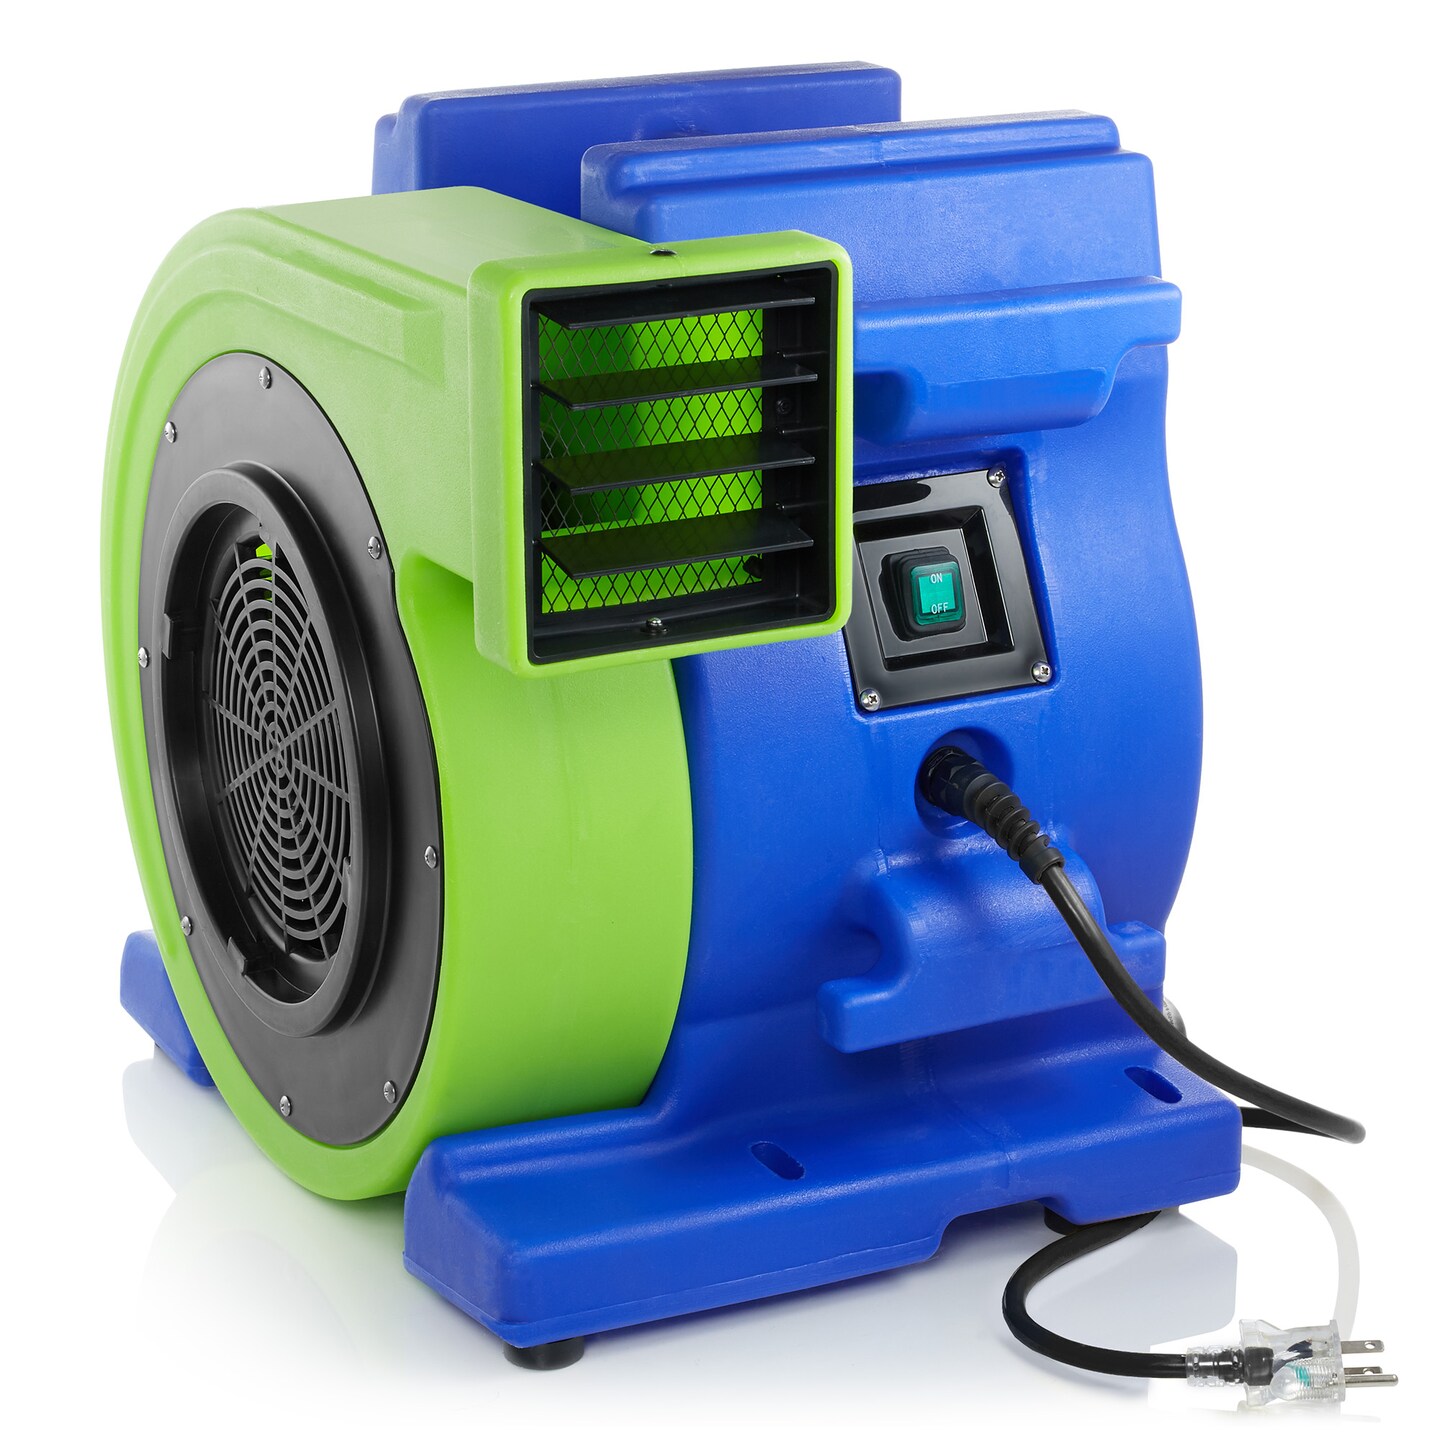 Cloud 9 Inflatable Bounce House Blower, 2 HP - Commercial Air Blower Fan